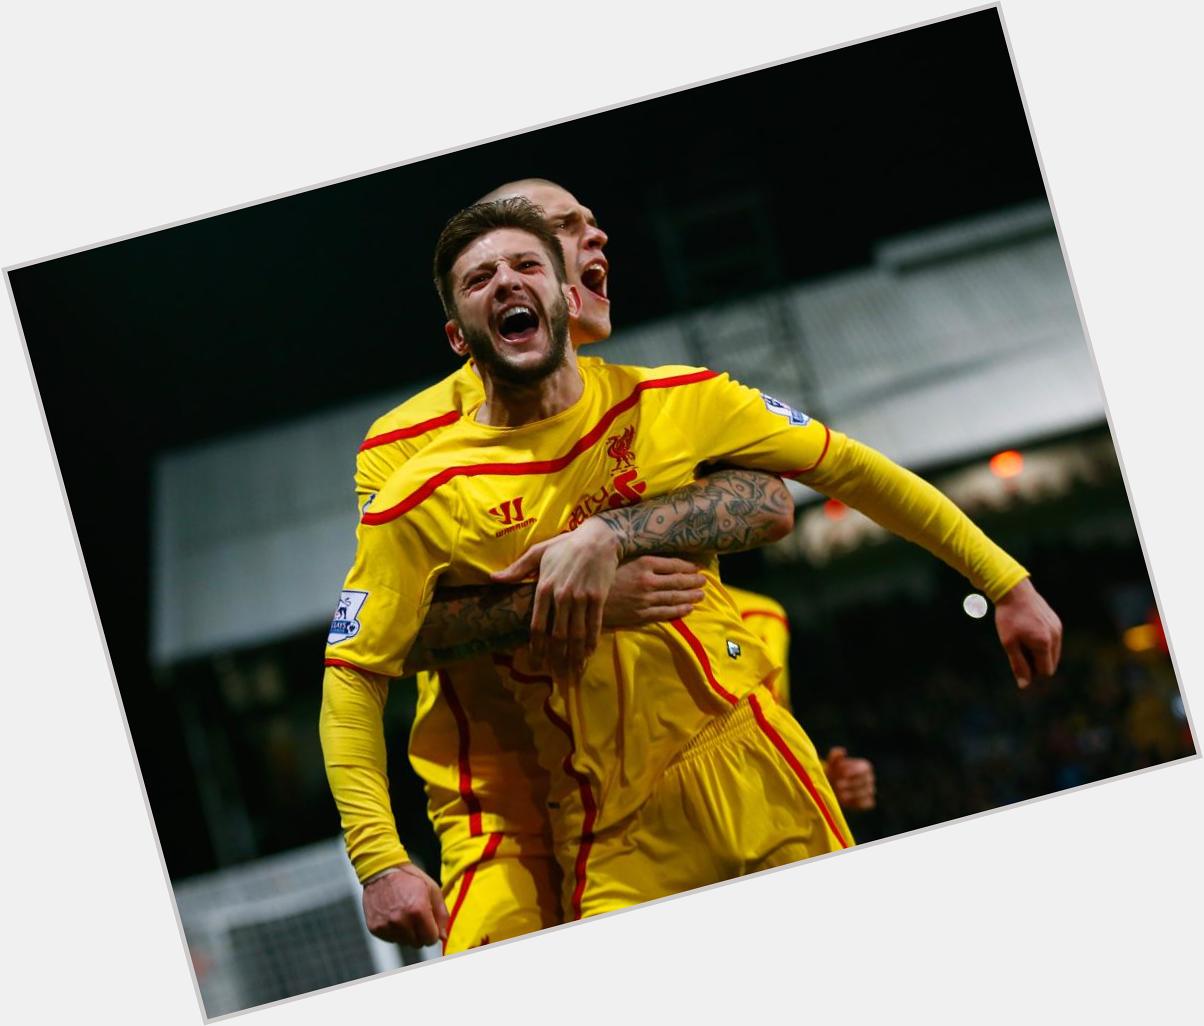 Happy 27th Birthday to the \"fantastic young player\" Adam Lallana! A goal today to celebrate would be nice! 